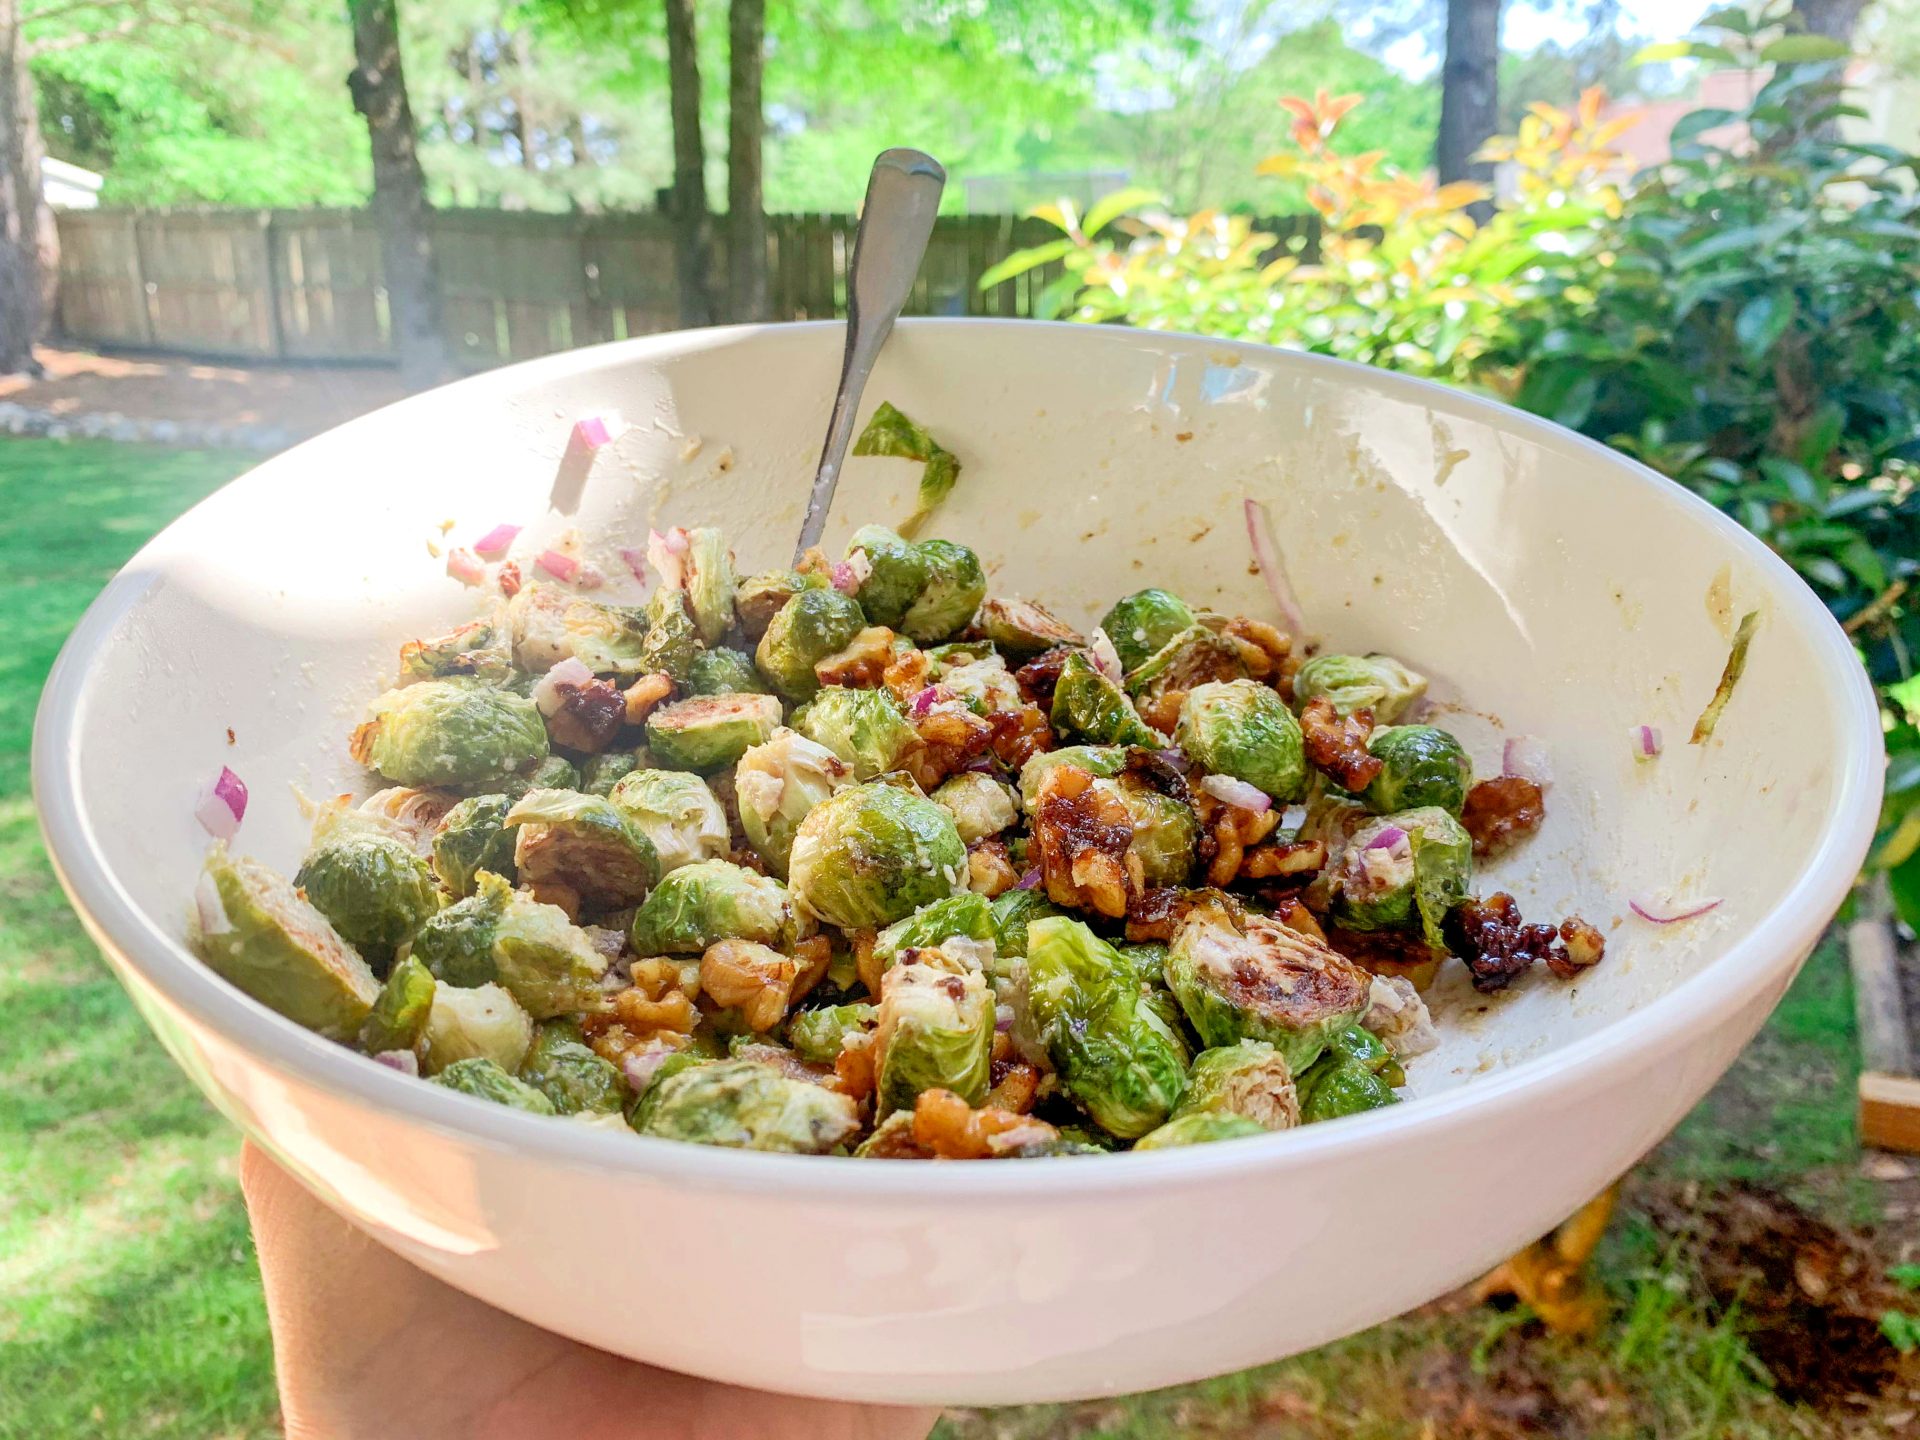 brussels sprouts, vegan, salad, brussel sprout salad, summer recipe, easy, creamy, walnuts, roasted, vegetable side dish, roasted vegetables, onion, healthy eating, summer picnic, barbecue